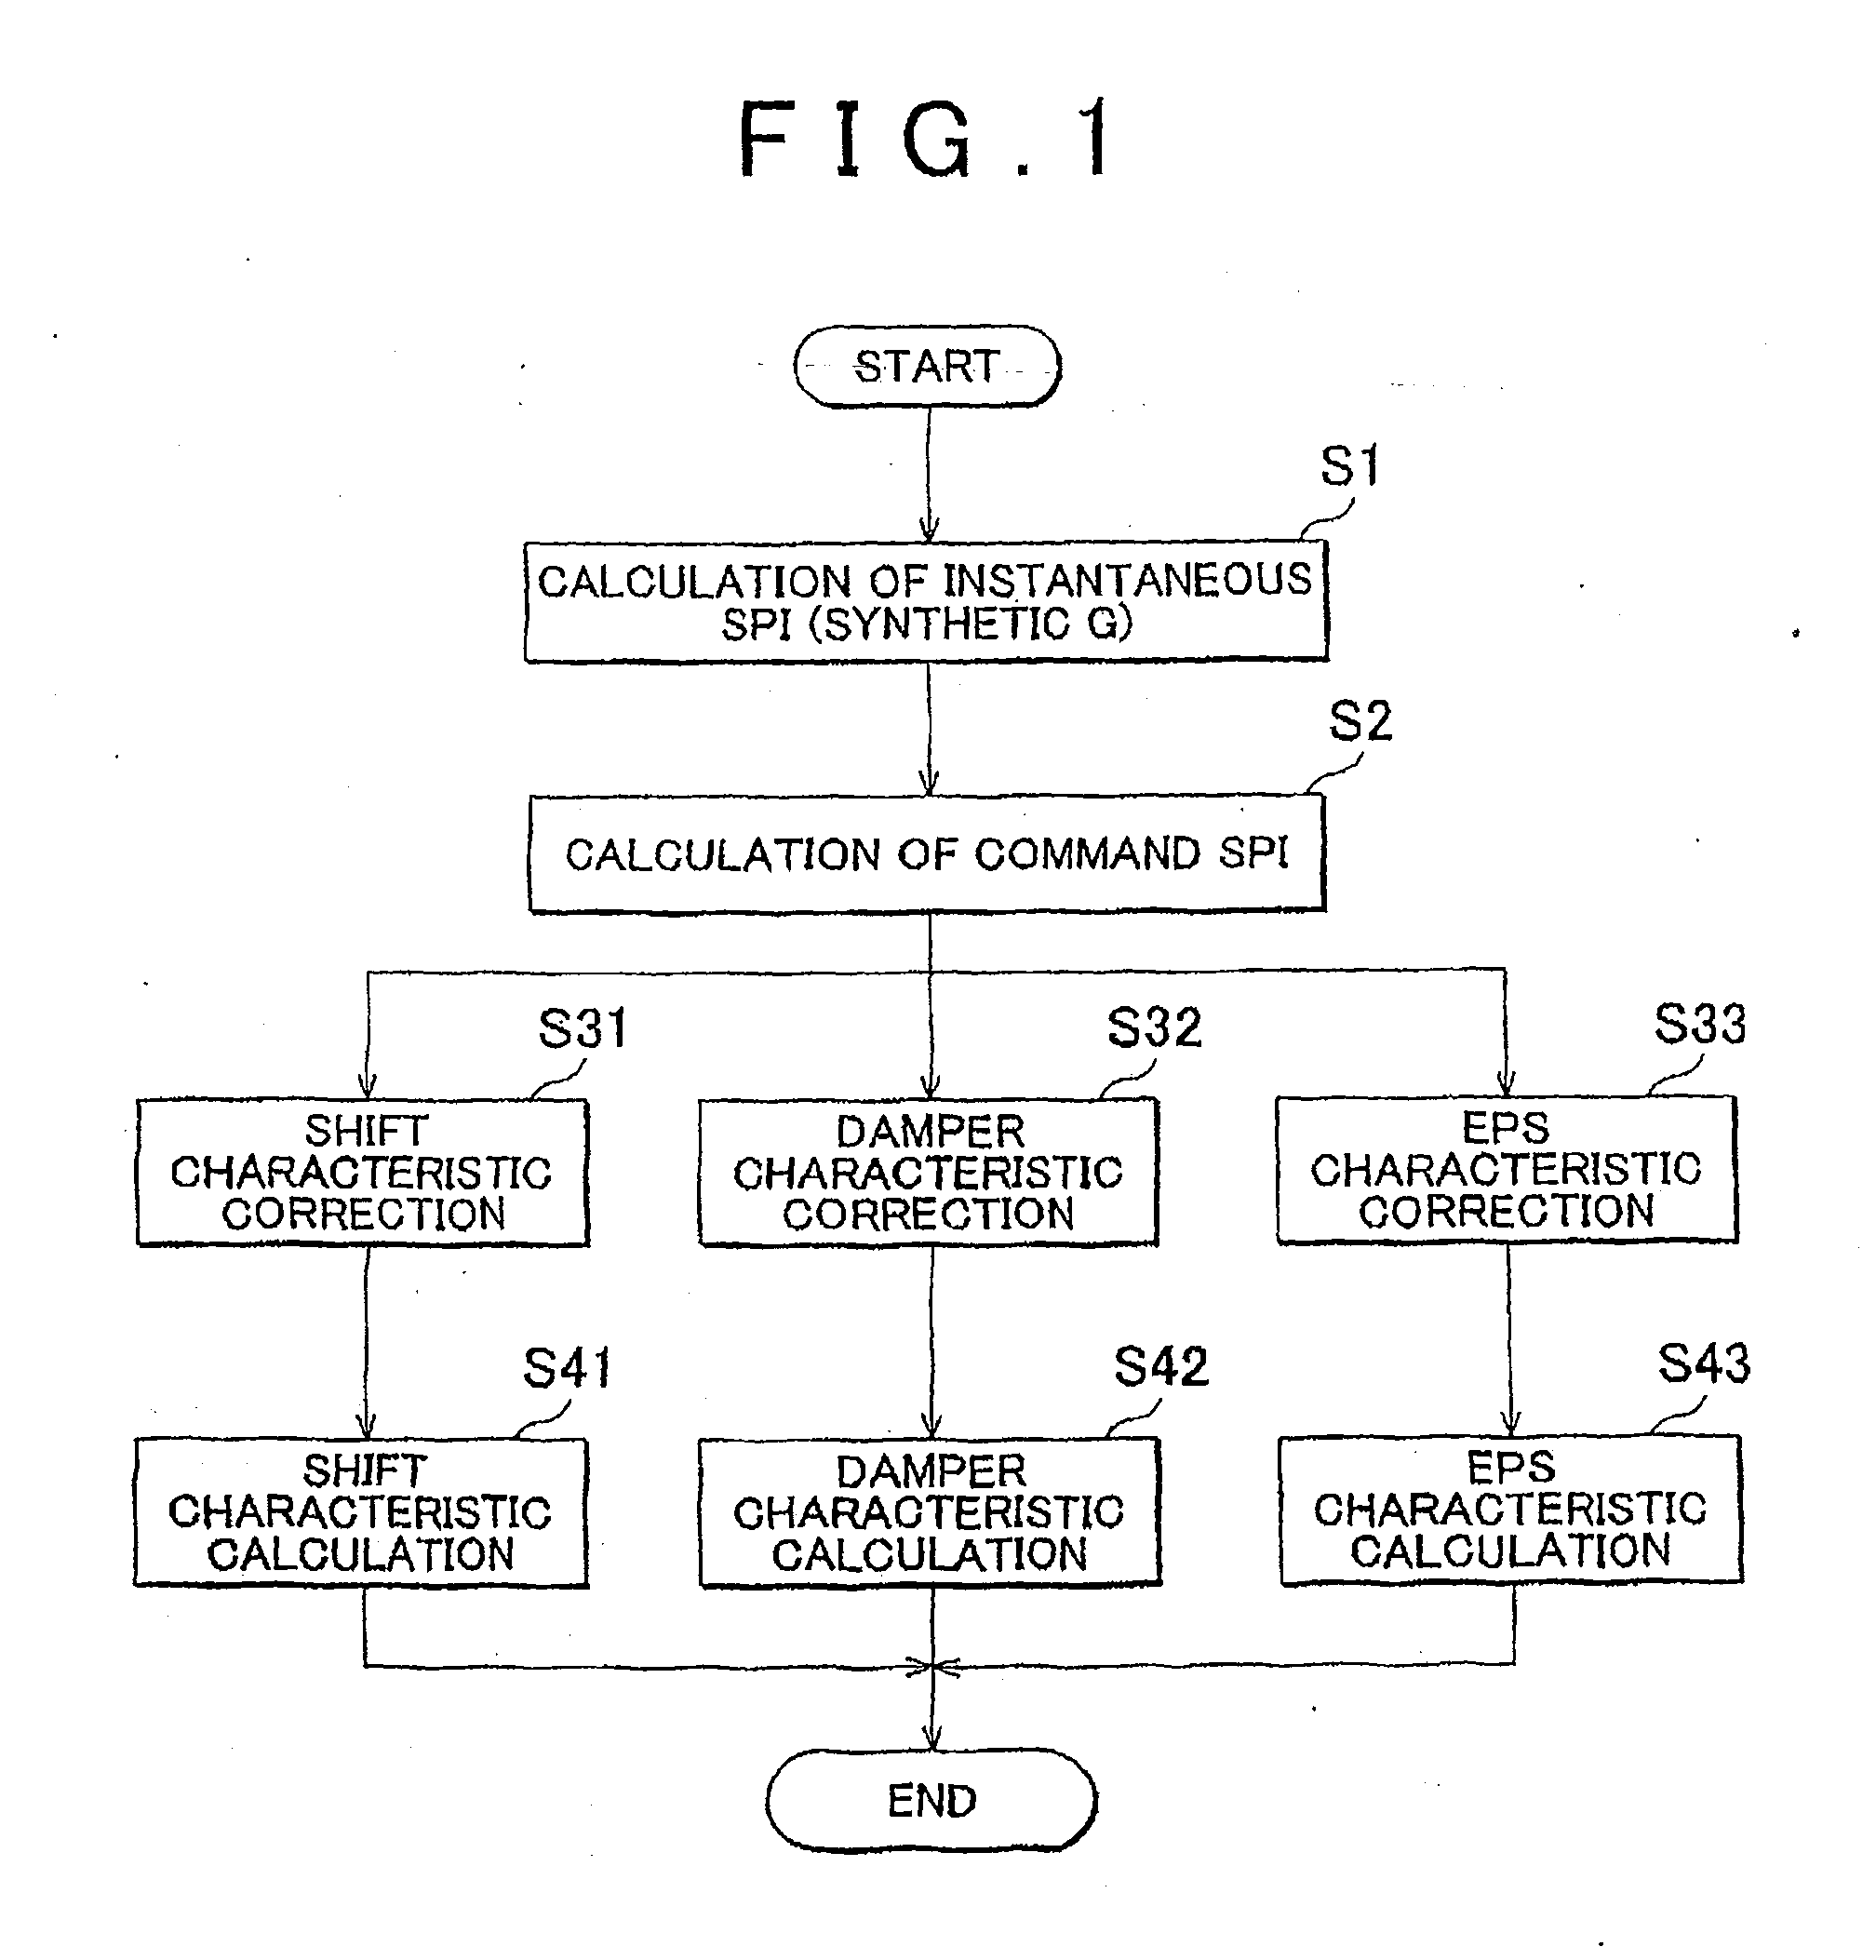 Vehicle control system